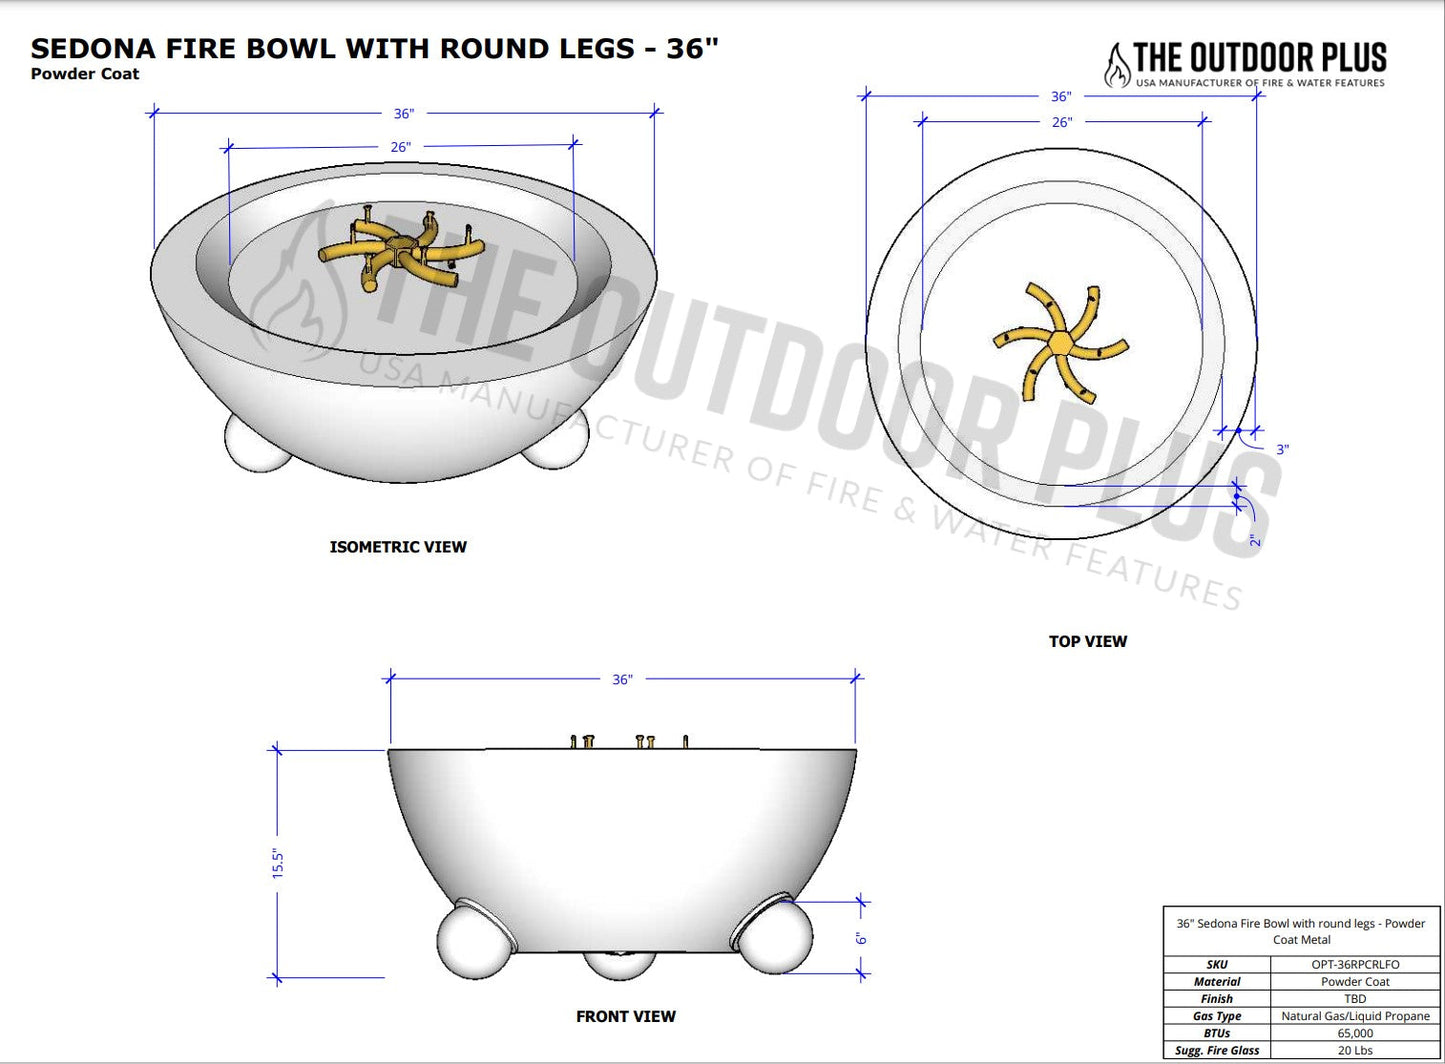 The Outdoor Plus Sedona Fire Bowl with Round Legs